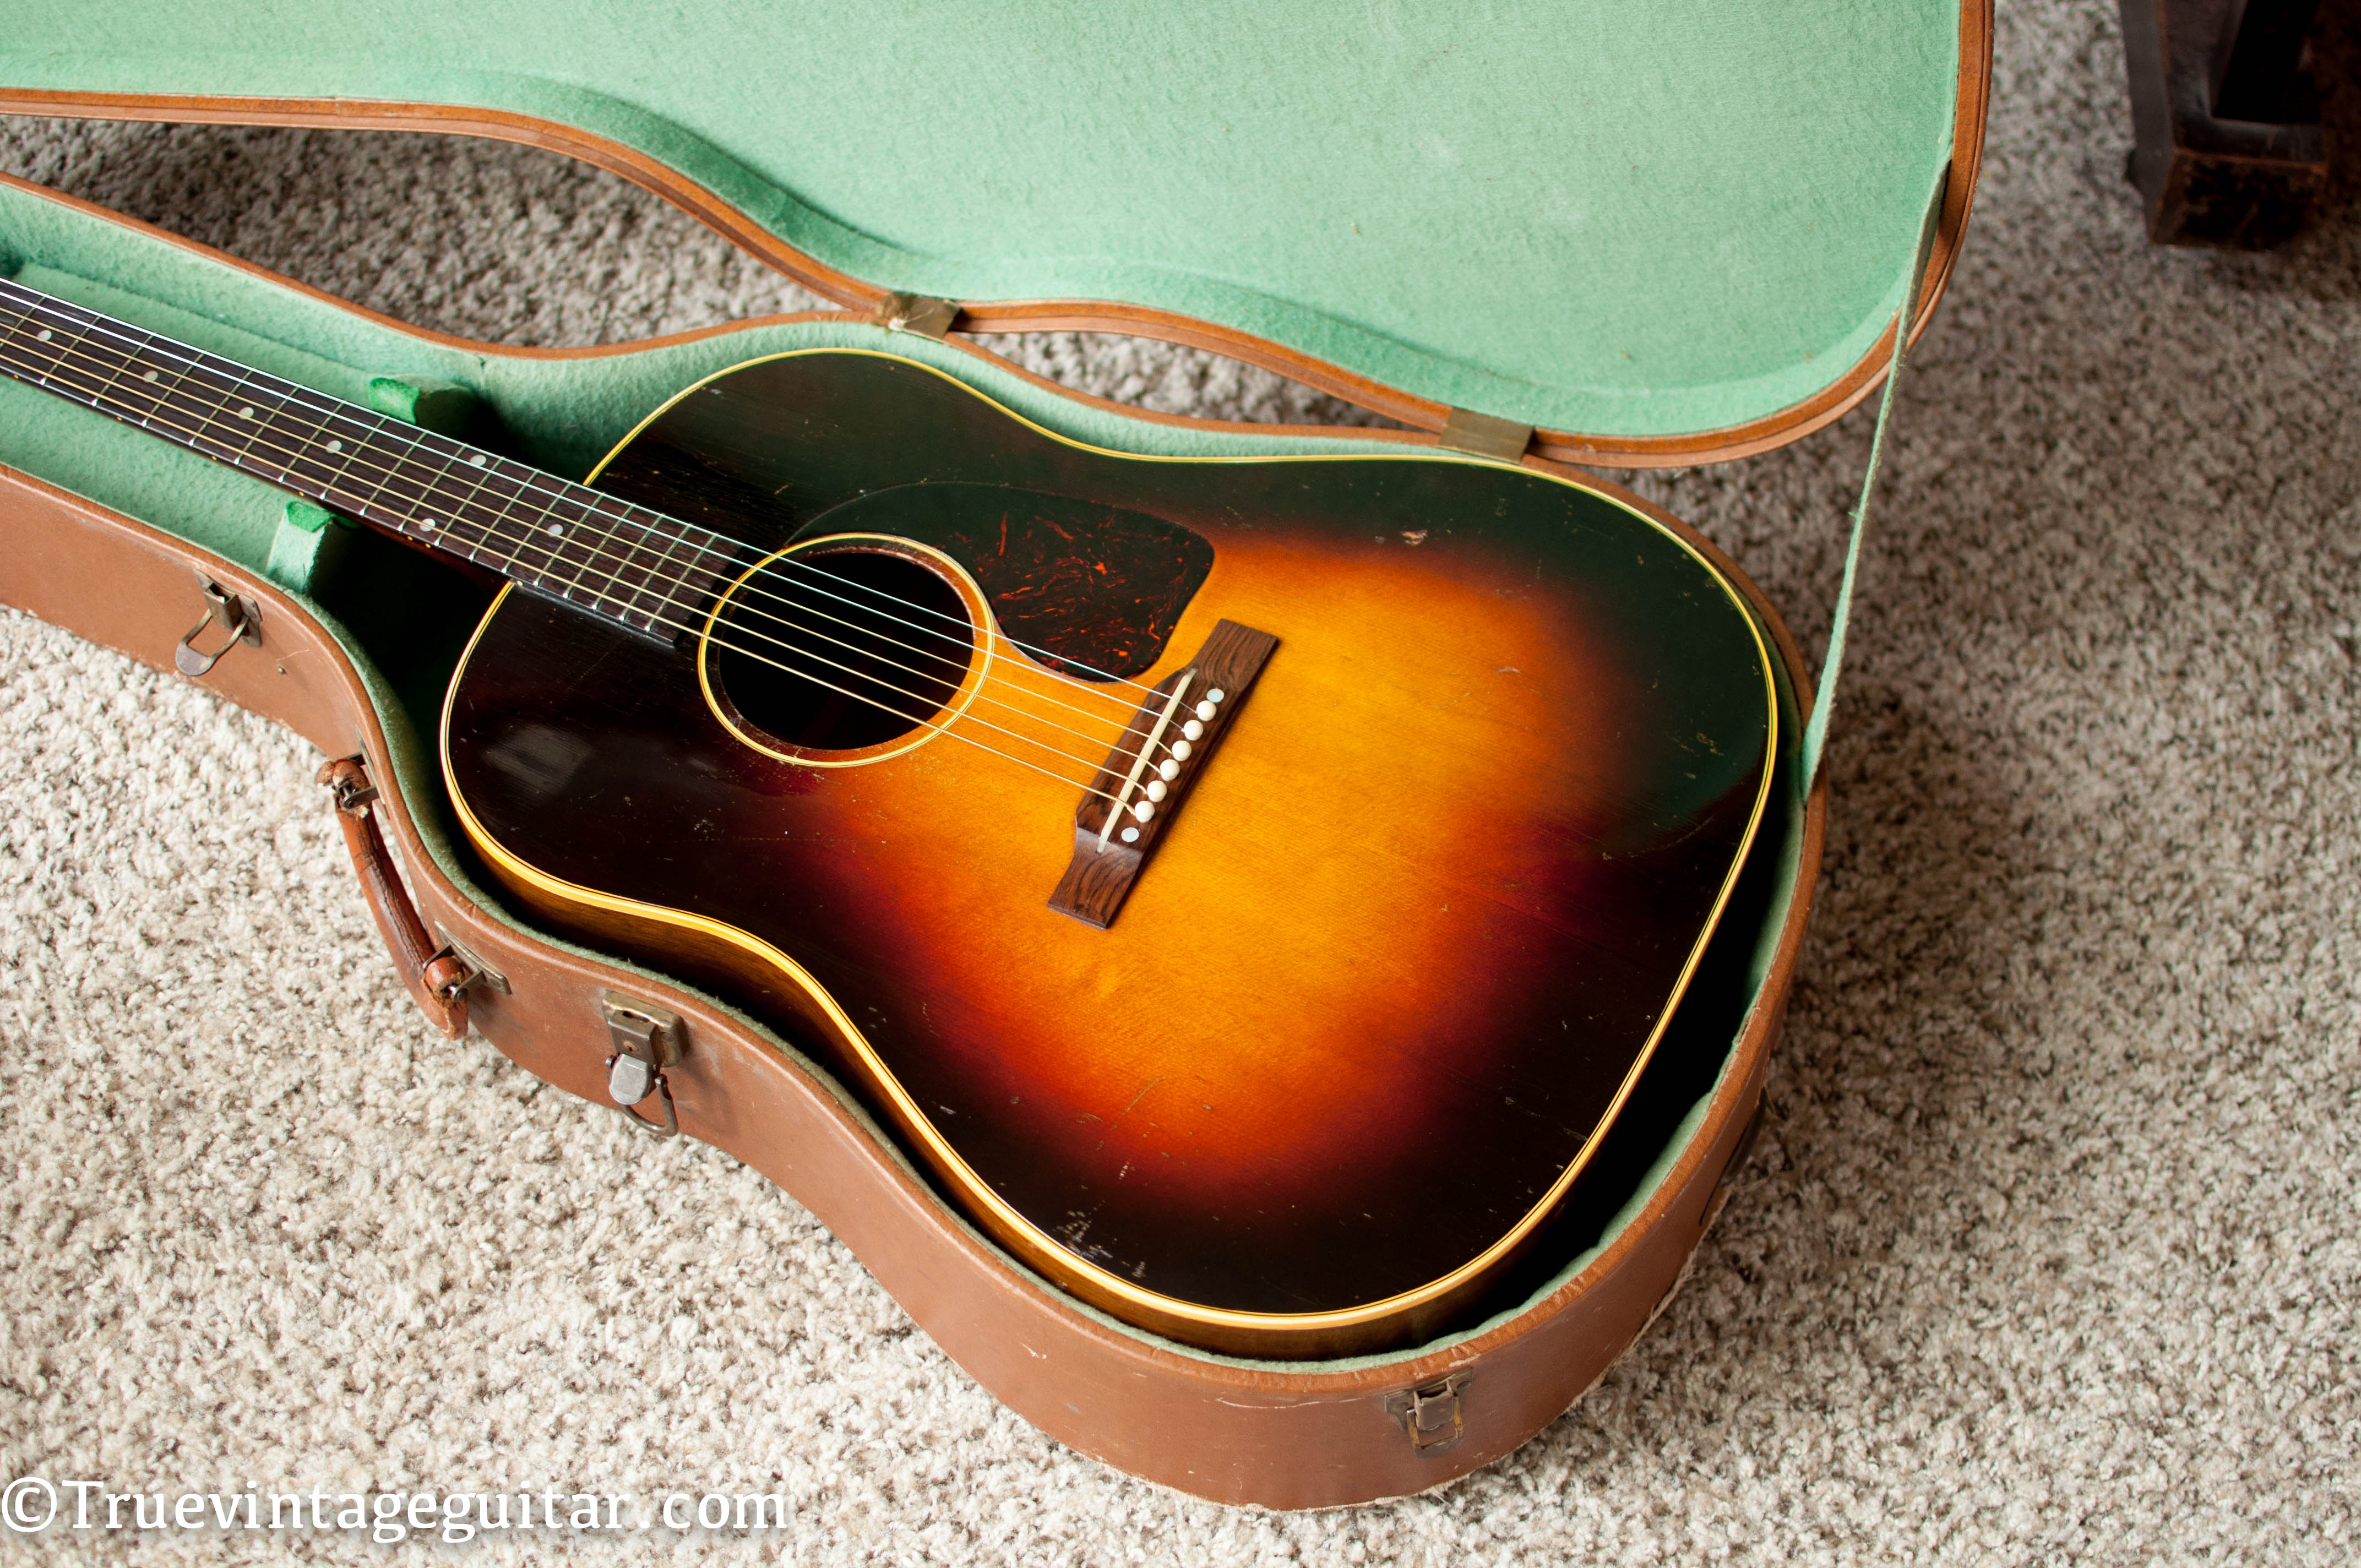 1950s Gibson acoustic guitar